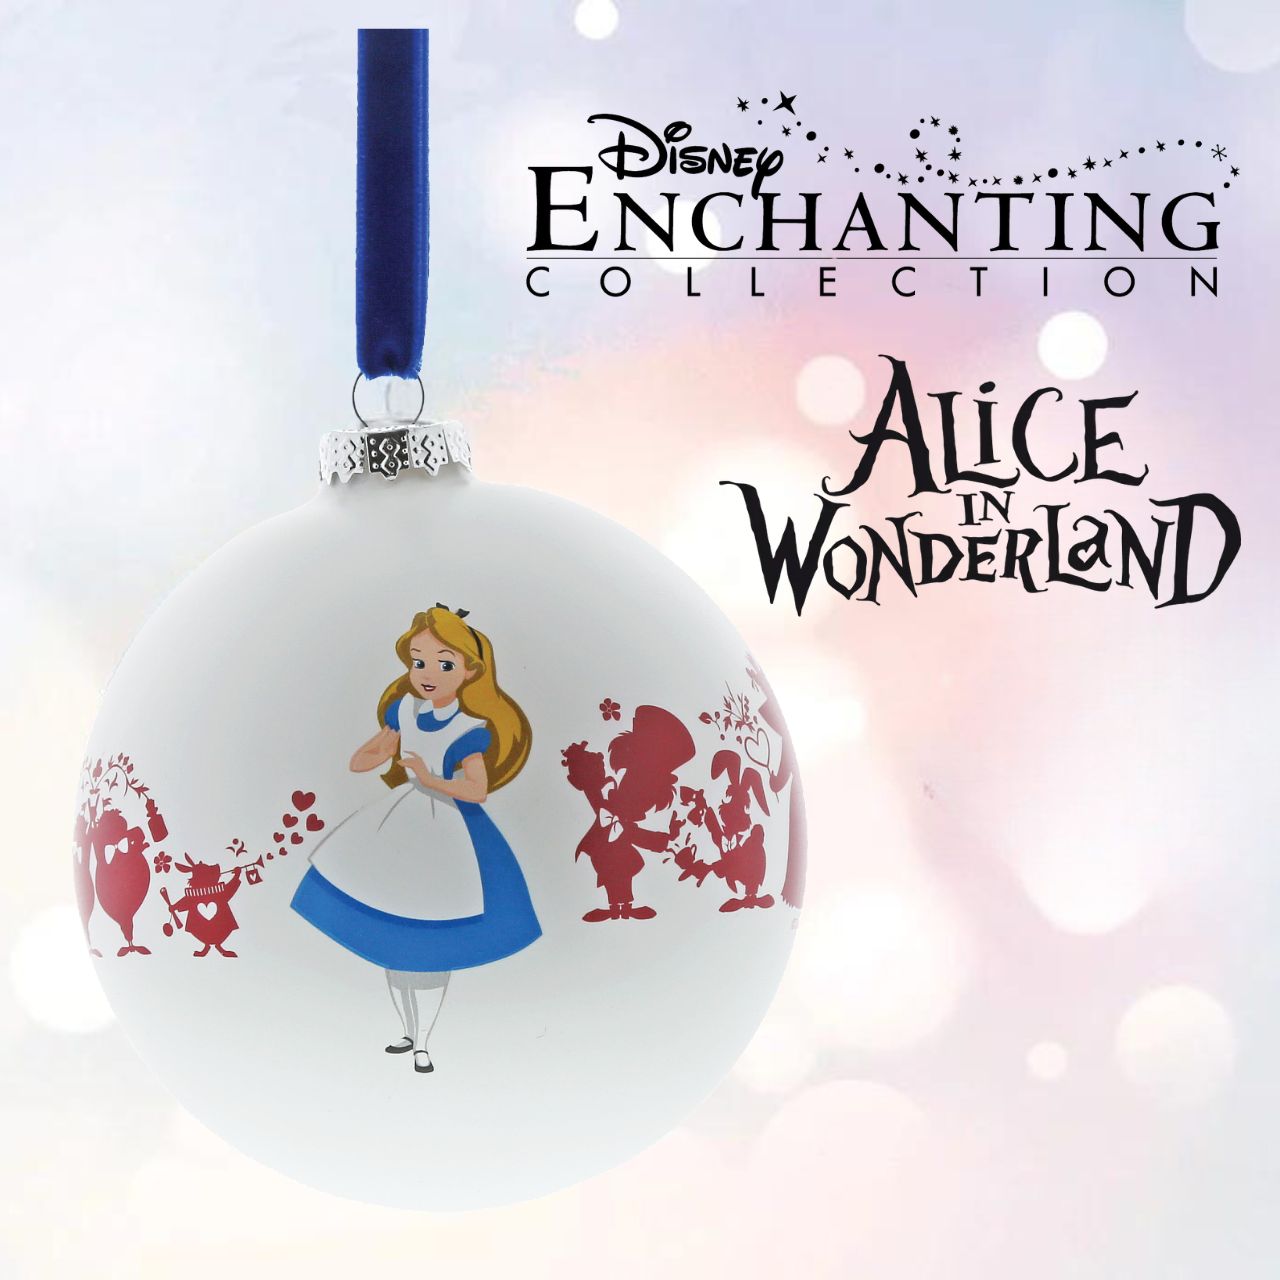 Disney Enchanting Collection Alice in Wonderland We're All Mad Here  A beautiful glass Alice Bauble that makes for a treasured keepsake all year round. This bauble features the popular characters from the curious Disney film Alice in Wonderland. This item would make a lovely unique gift for a friend, or a self-purchase to brighten up the home. Presented in a branded window box.